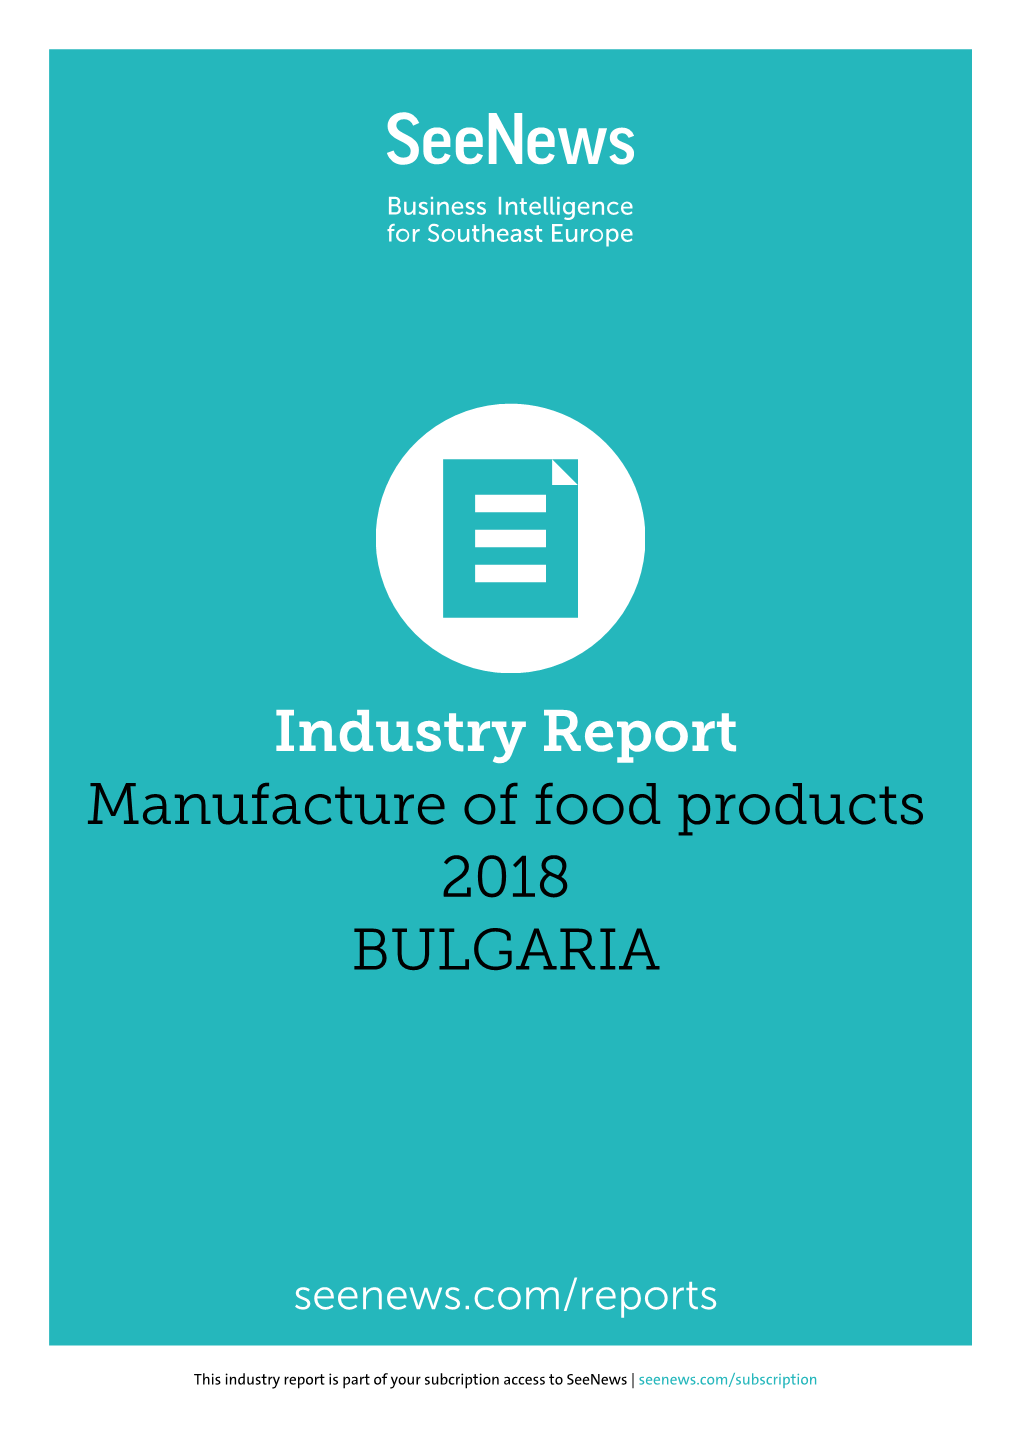 Industry Report Manufacture of Food Products 2018 BULGARIA